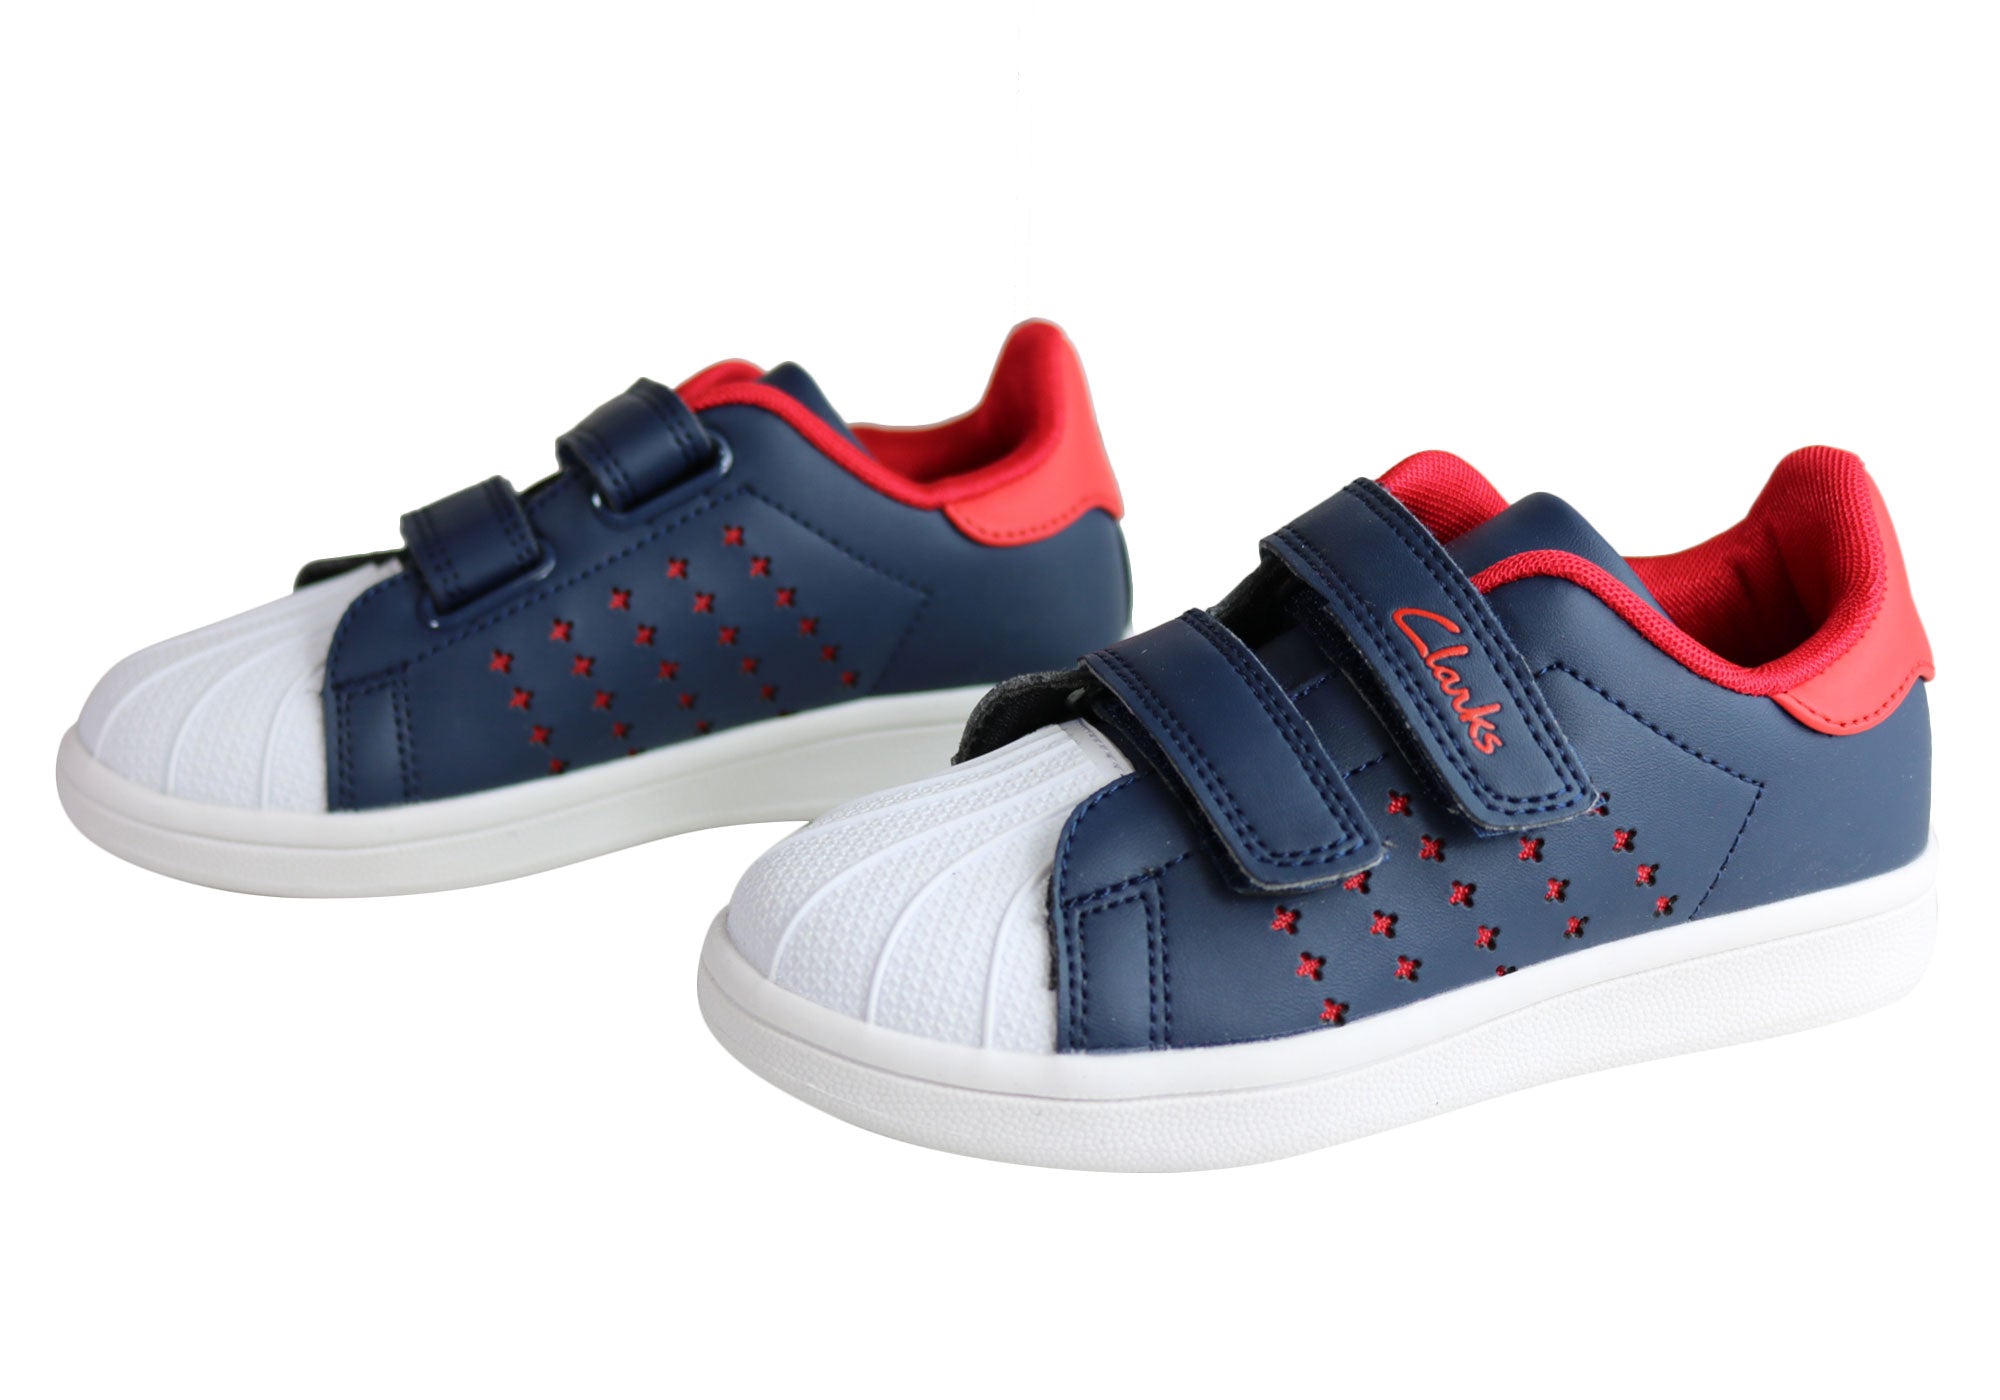 boys navy casual shoes